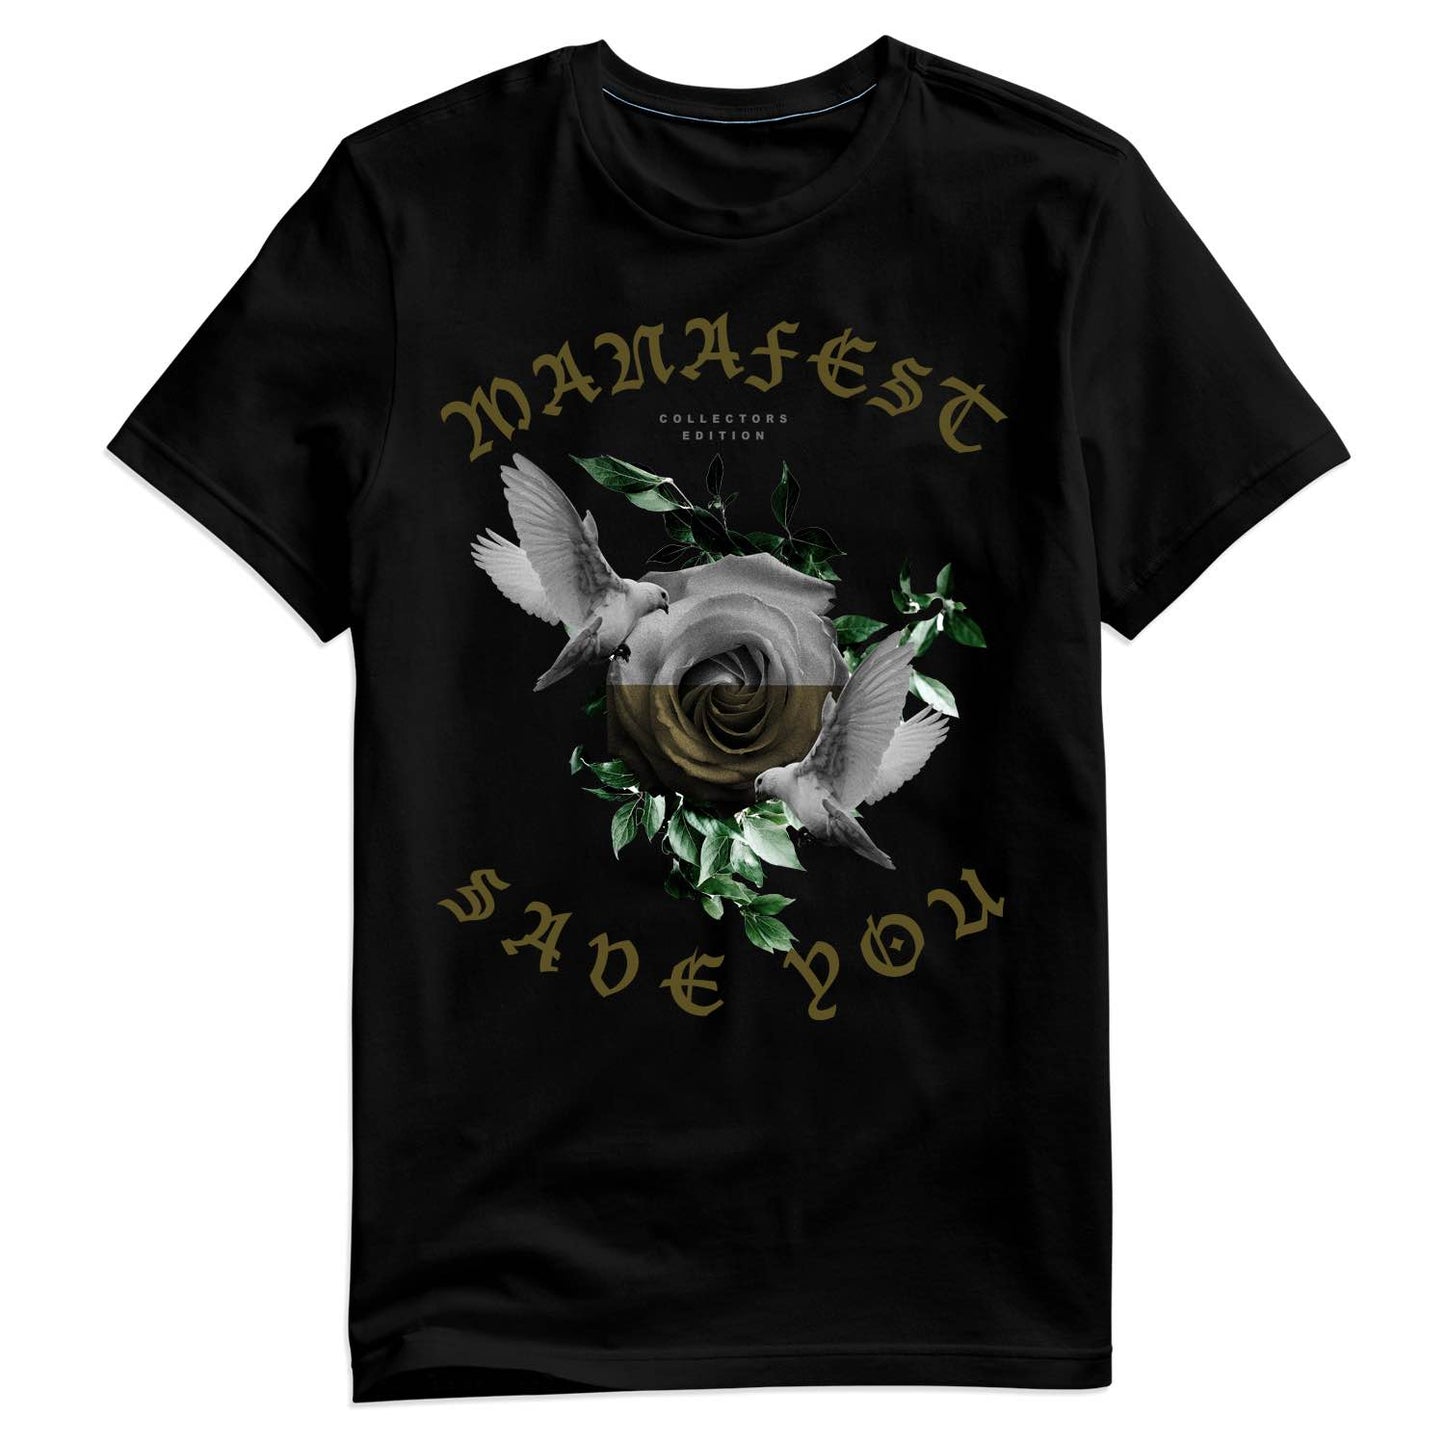 Save You Collectors Edition T-Shirt